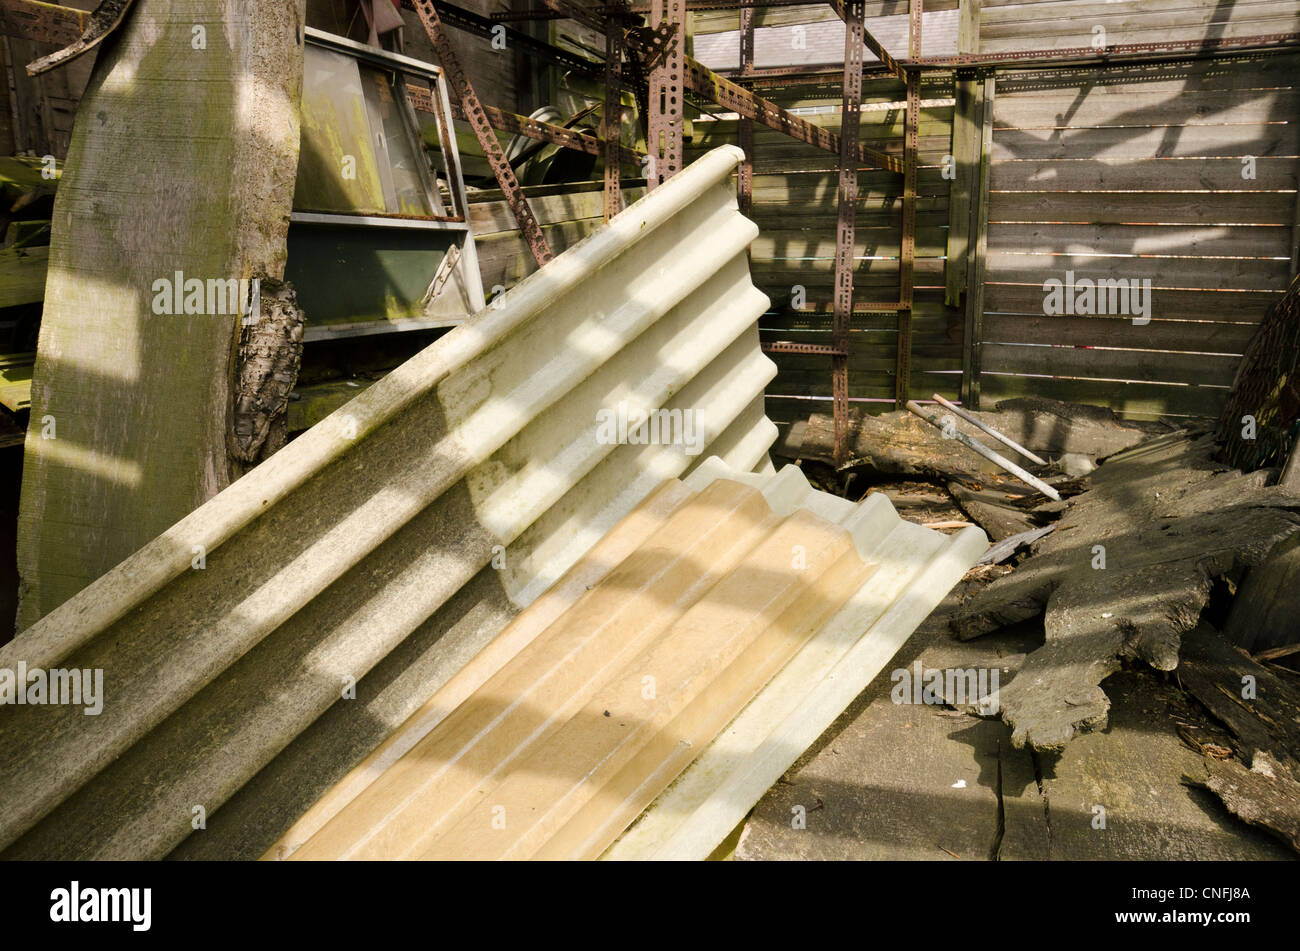 A pile of  discarded corrugated plastic, asbestos, debris and assorted filth and rubbish Stock Photo